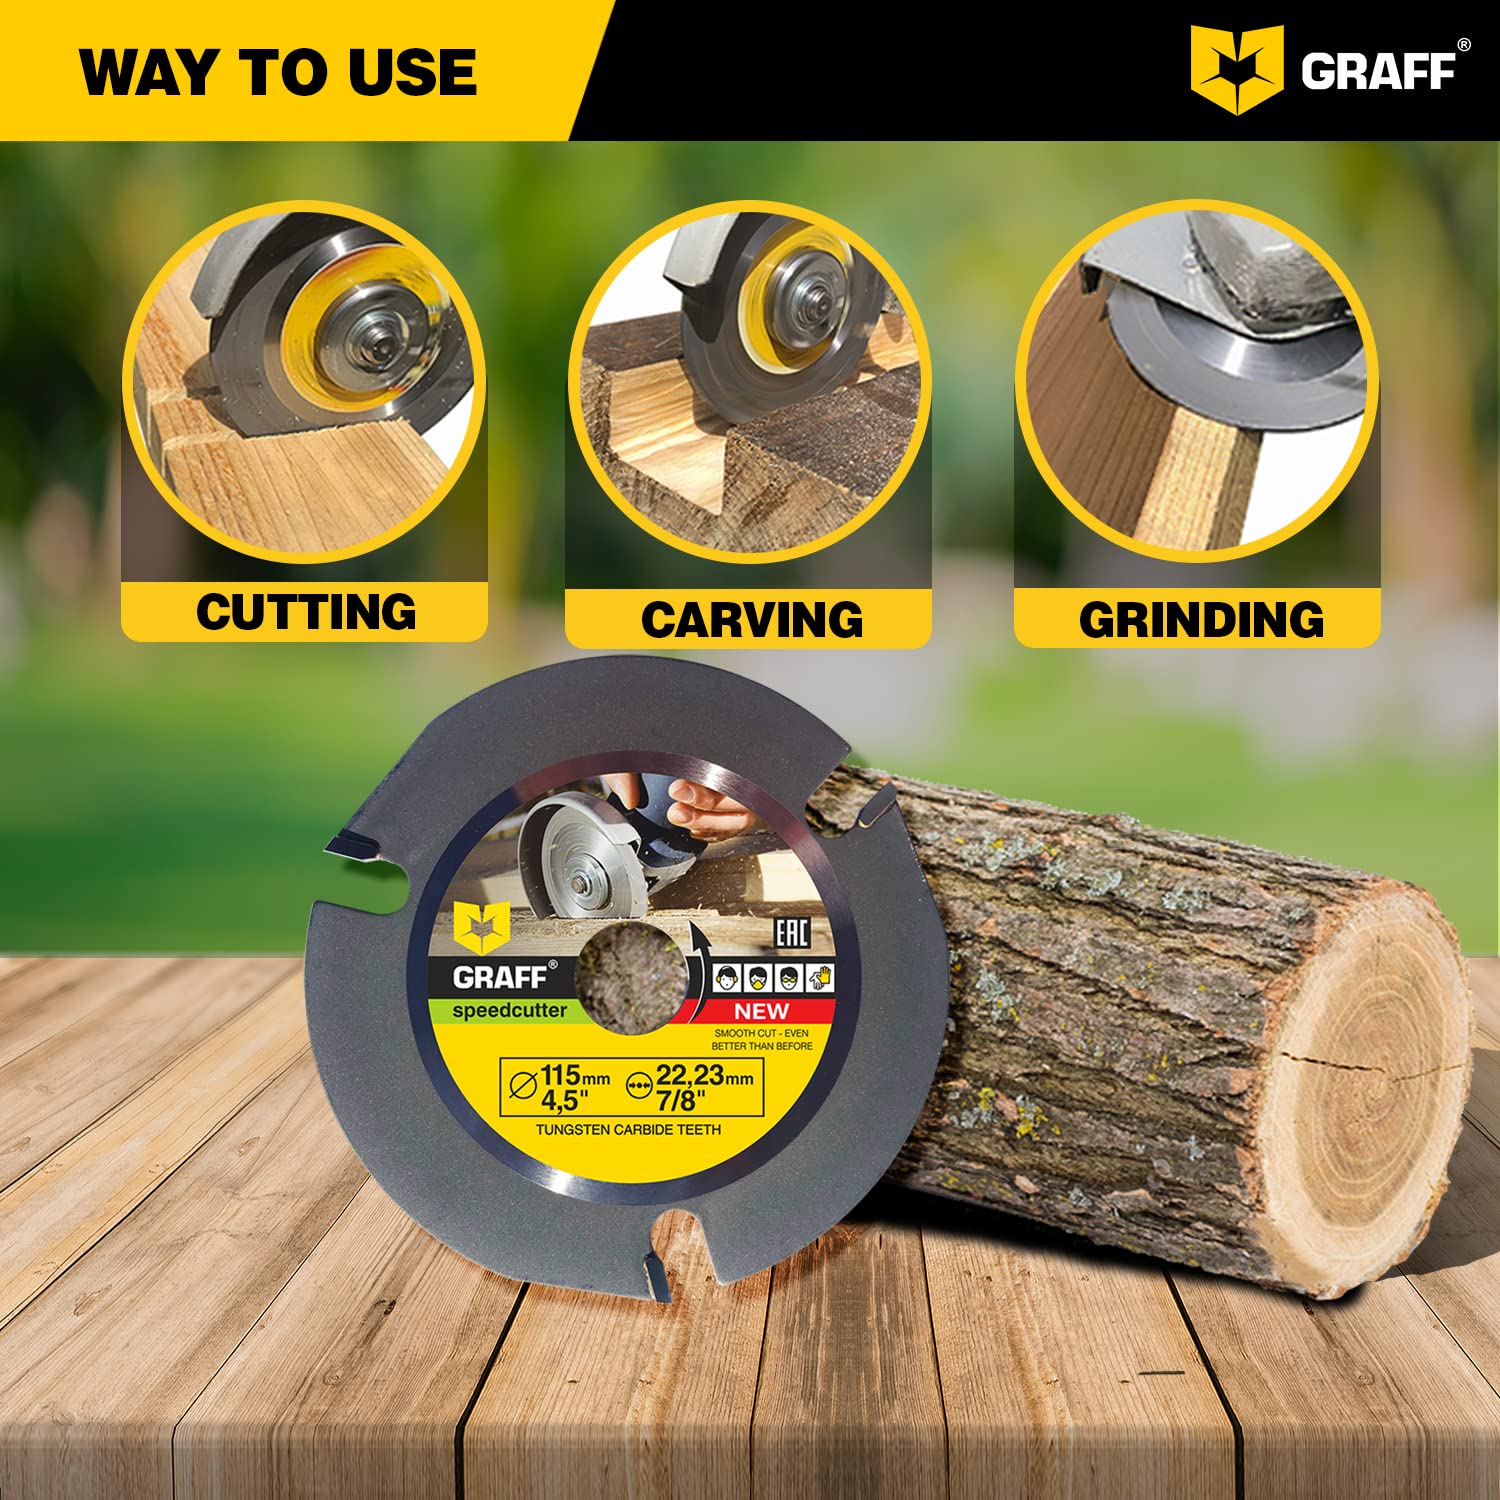 GRAFF SPEEDCUTTER 4 ½ Wood Carving Disc for Angle Grinder - Circular Saw Blade for Cutting, Sculpting & Shaping - 7/8" Arbor - 115mm